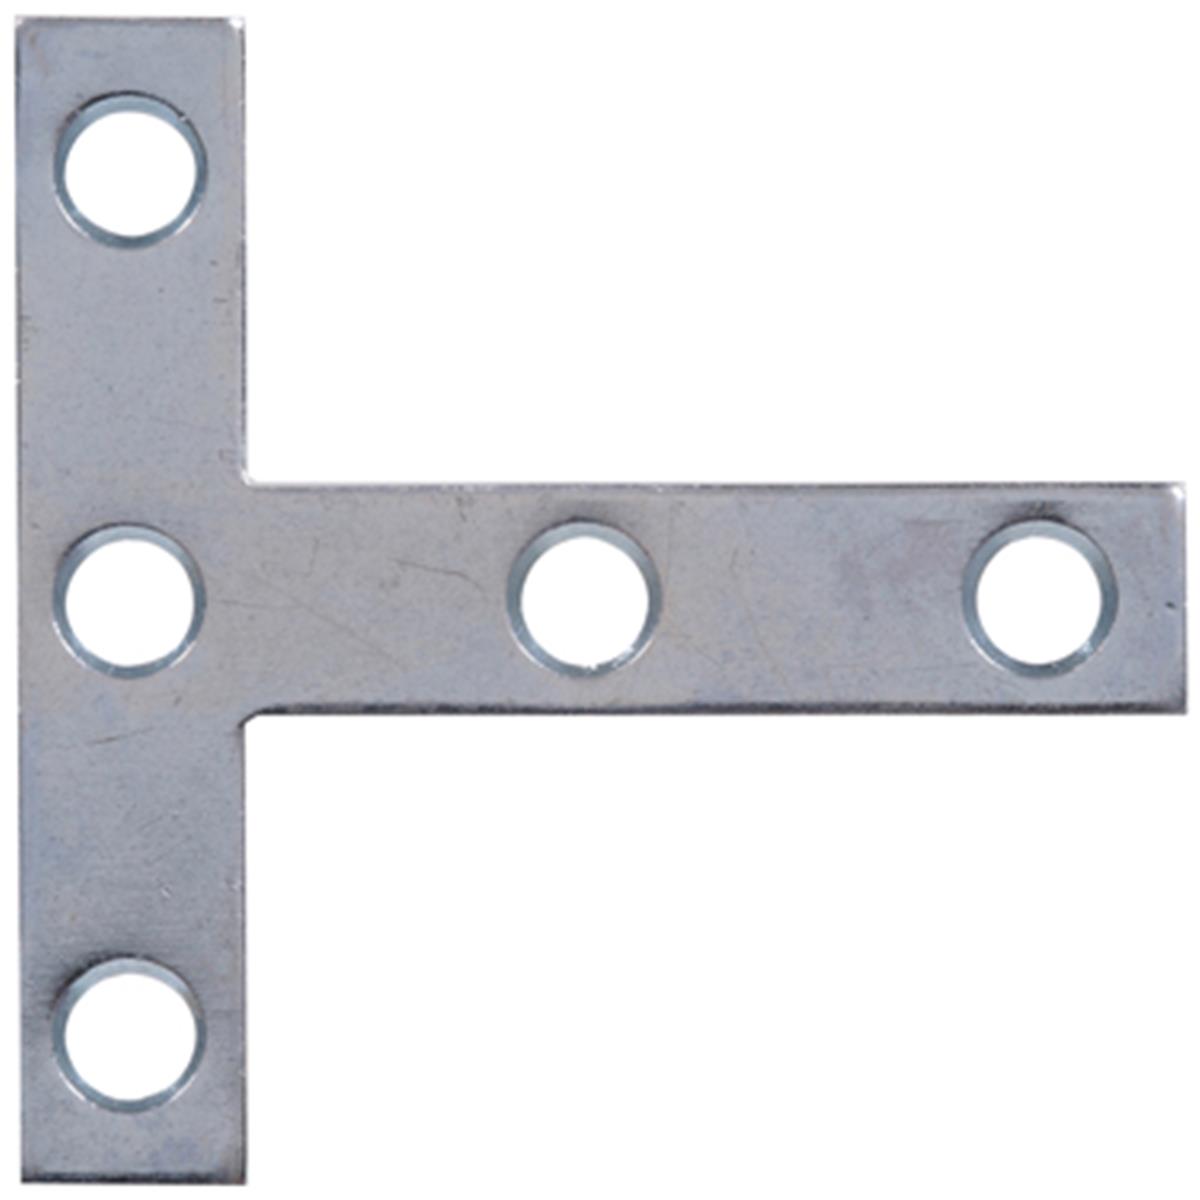 5 X 5 In. Zinc Plated T-plate